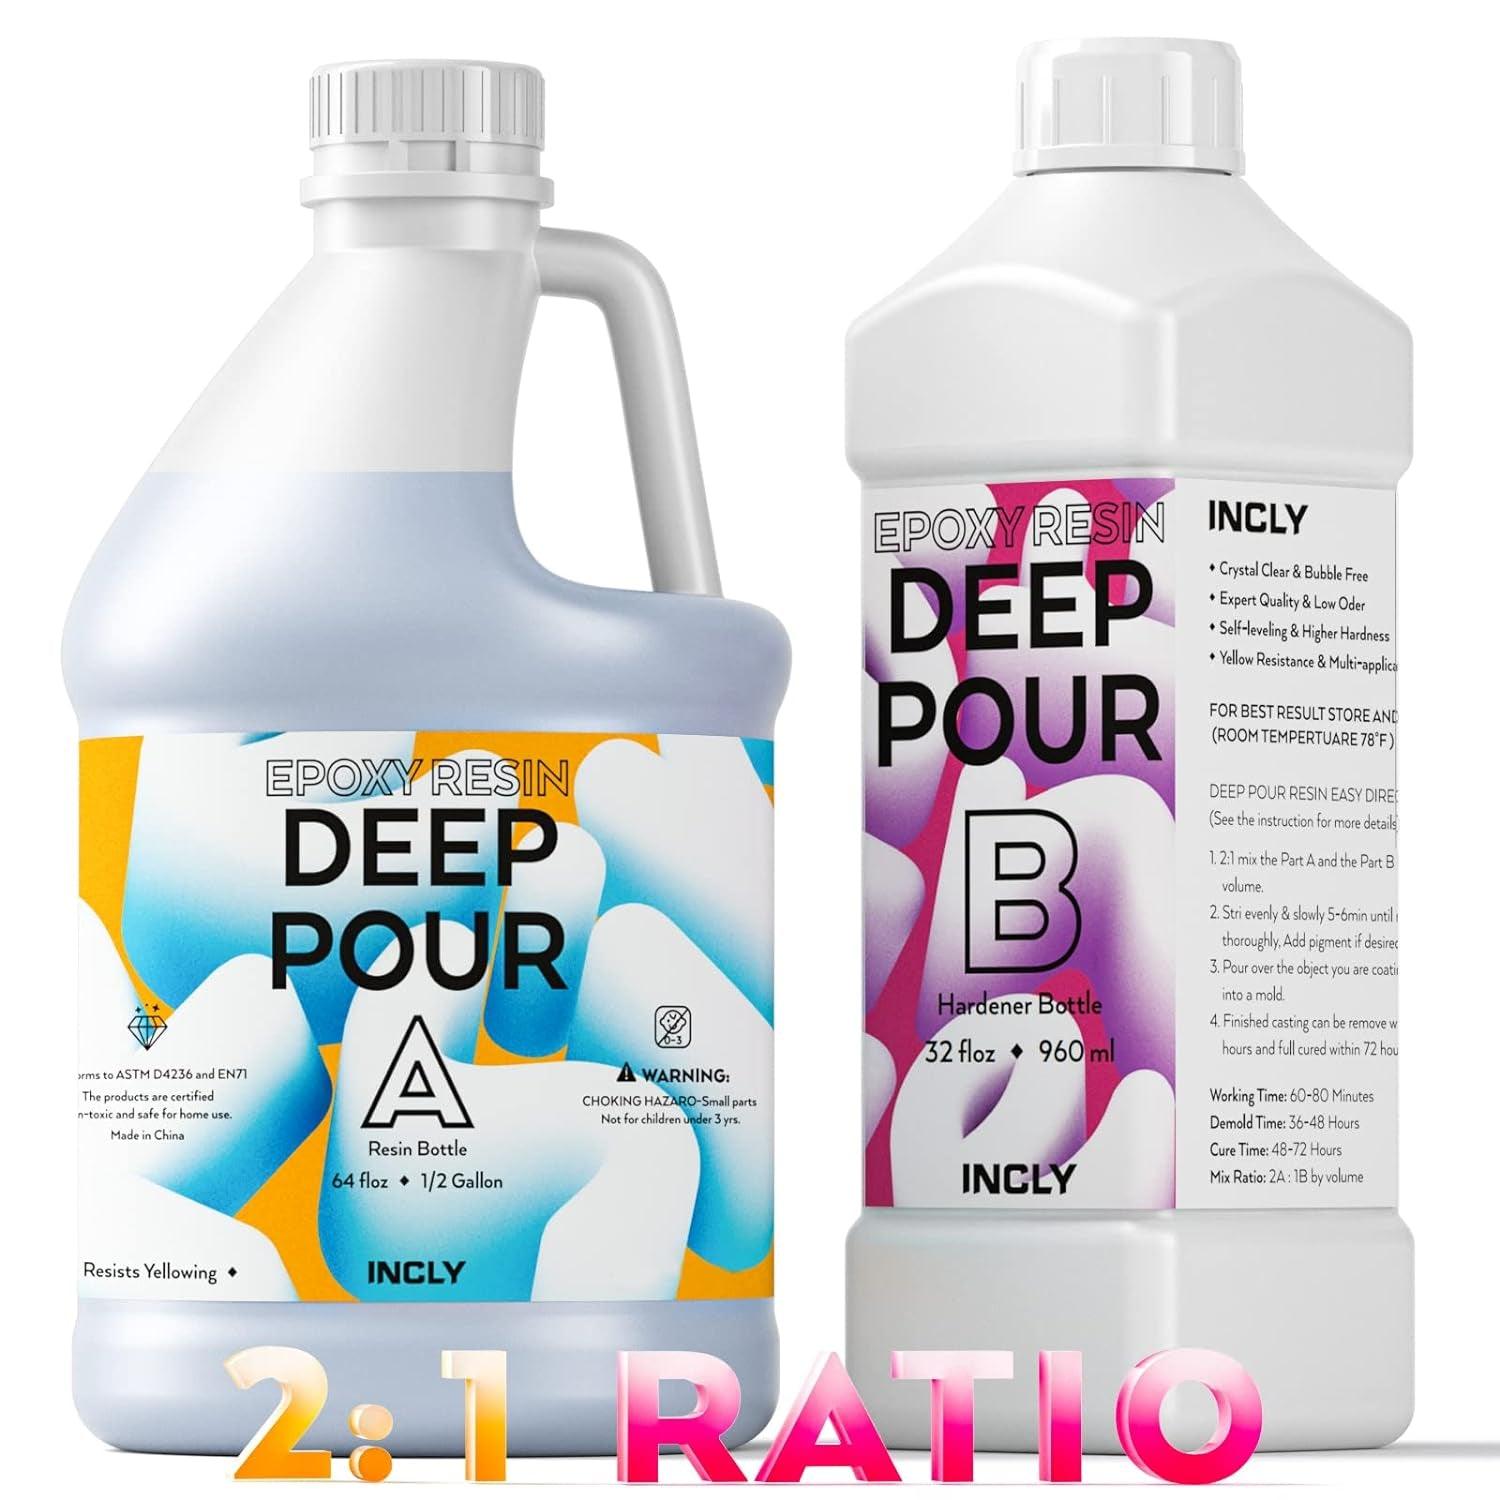 0.75 Gallon Deep Pour Epoxy Resin Kit, High Gloss & Bubble Free 2 to 4 Inch Depth Resin Epoxy, Resin Supplies for Coating & Casting, Craft River Table, Wood Filler, Bar Top, Self Leveling 2:1 - WoodArtSupply